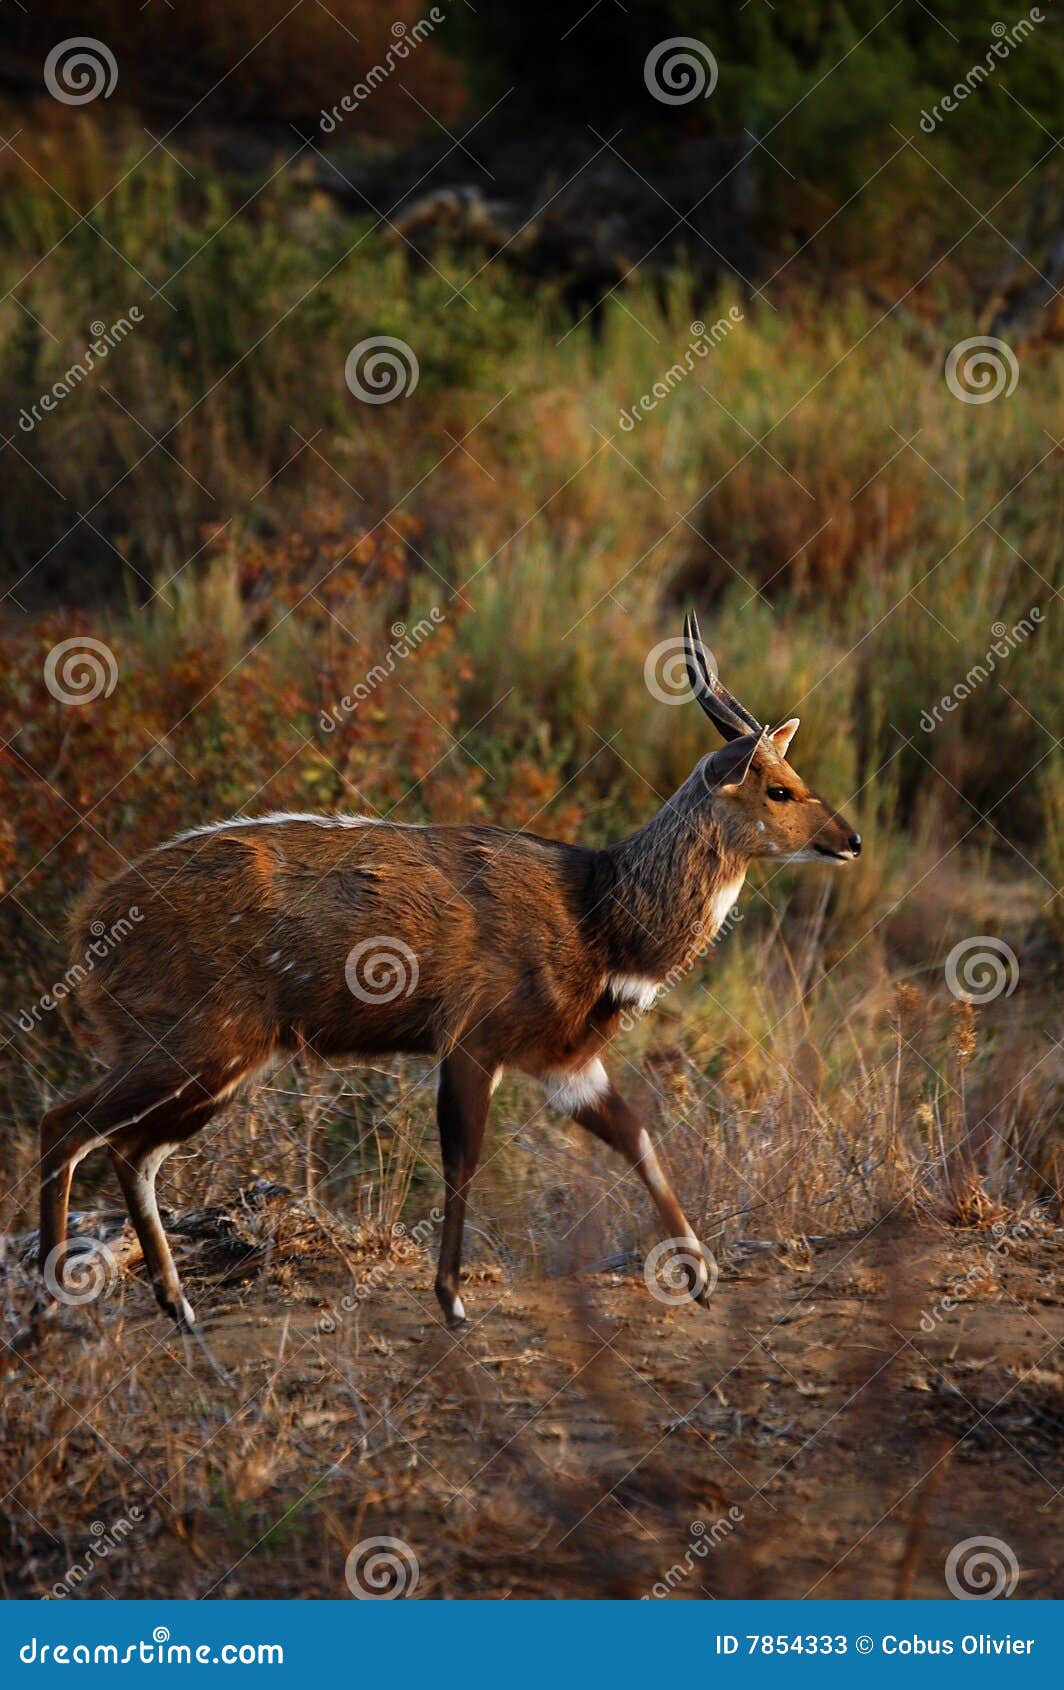 bushbuck in countryside